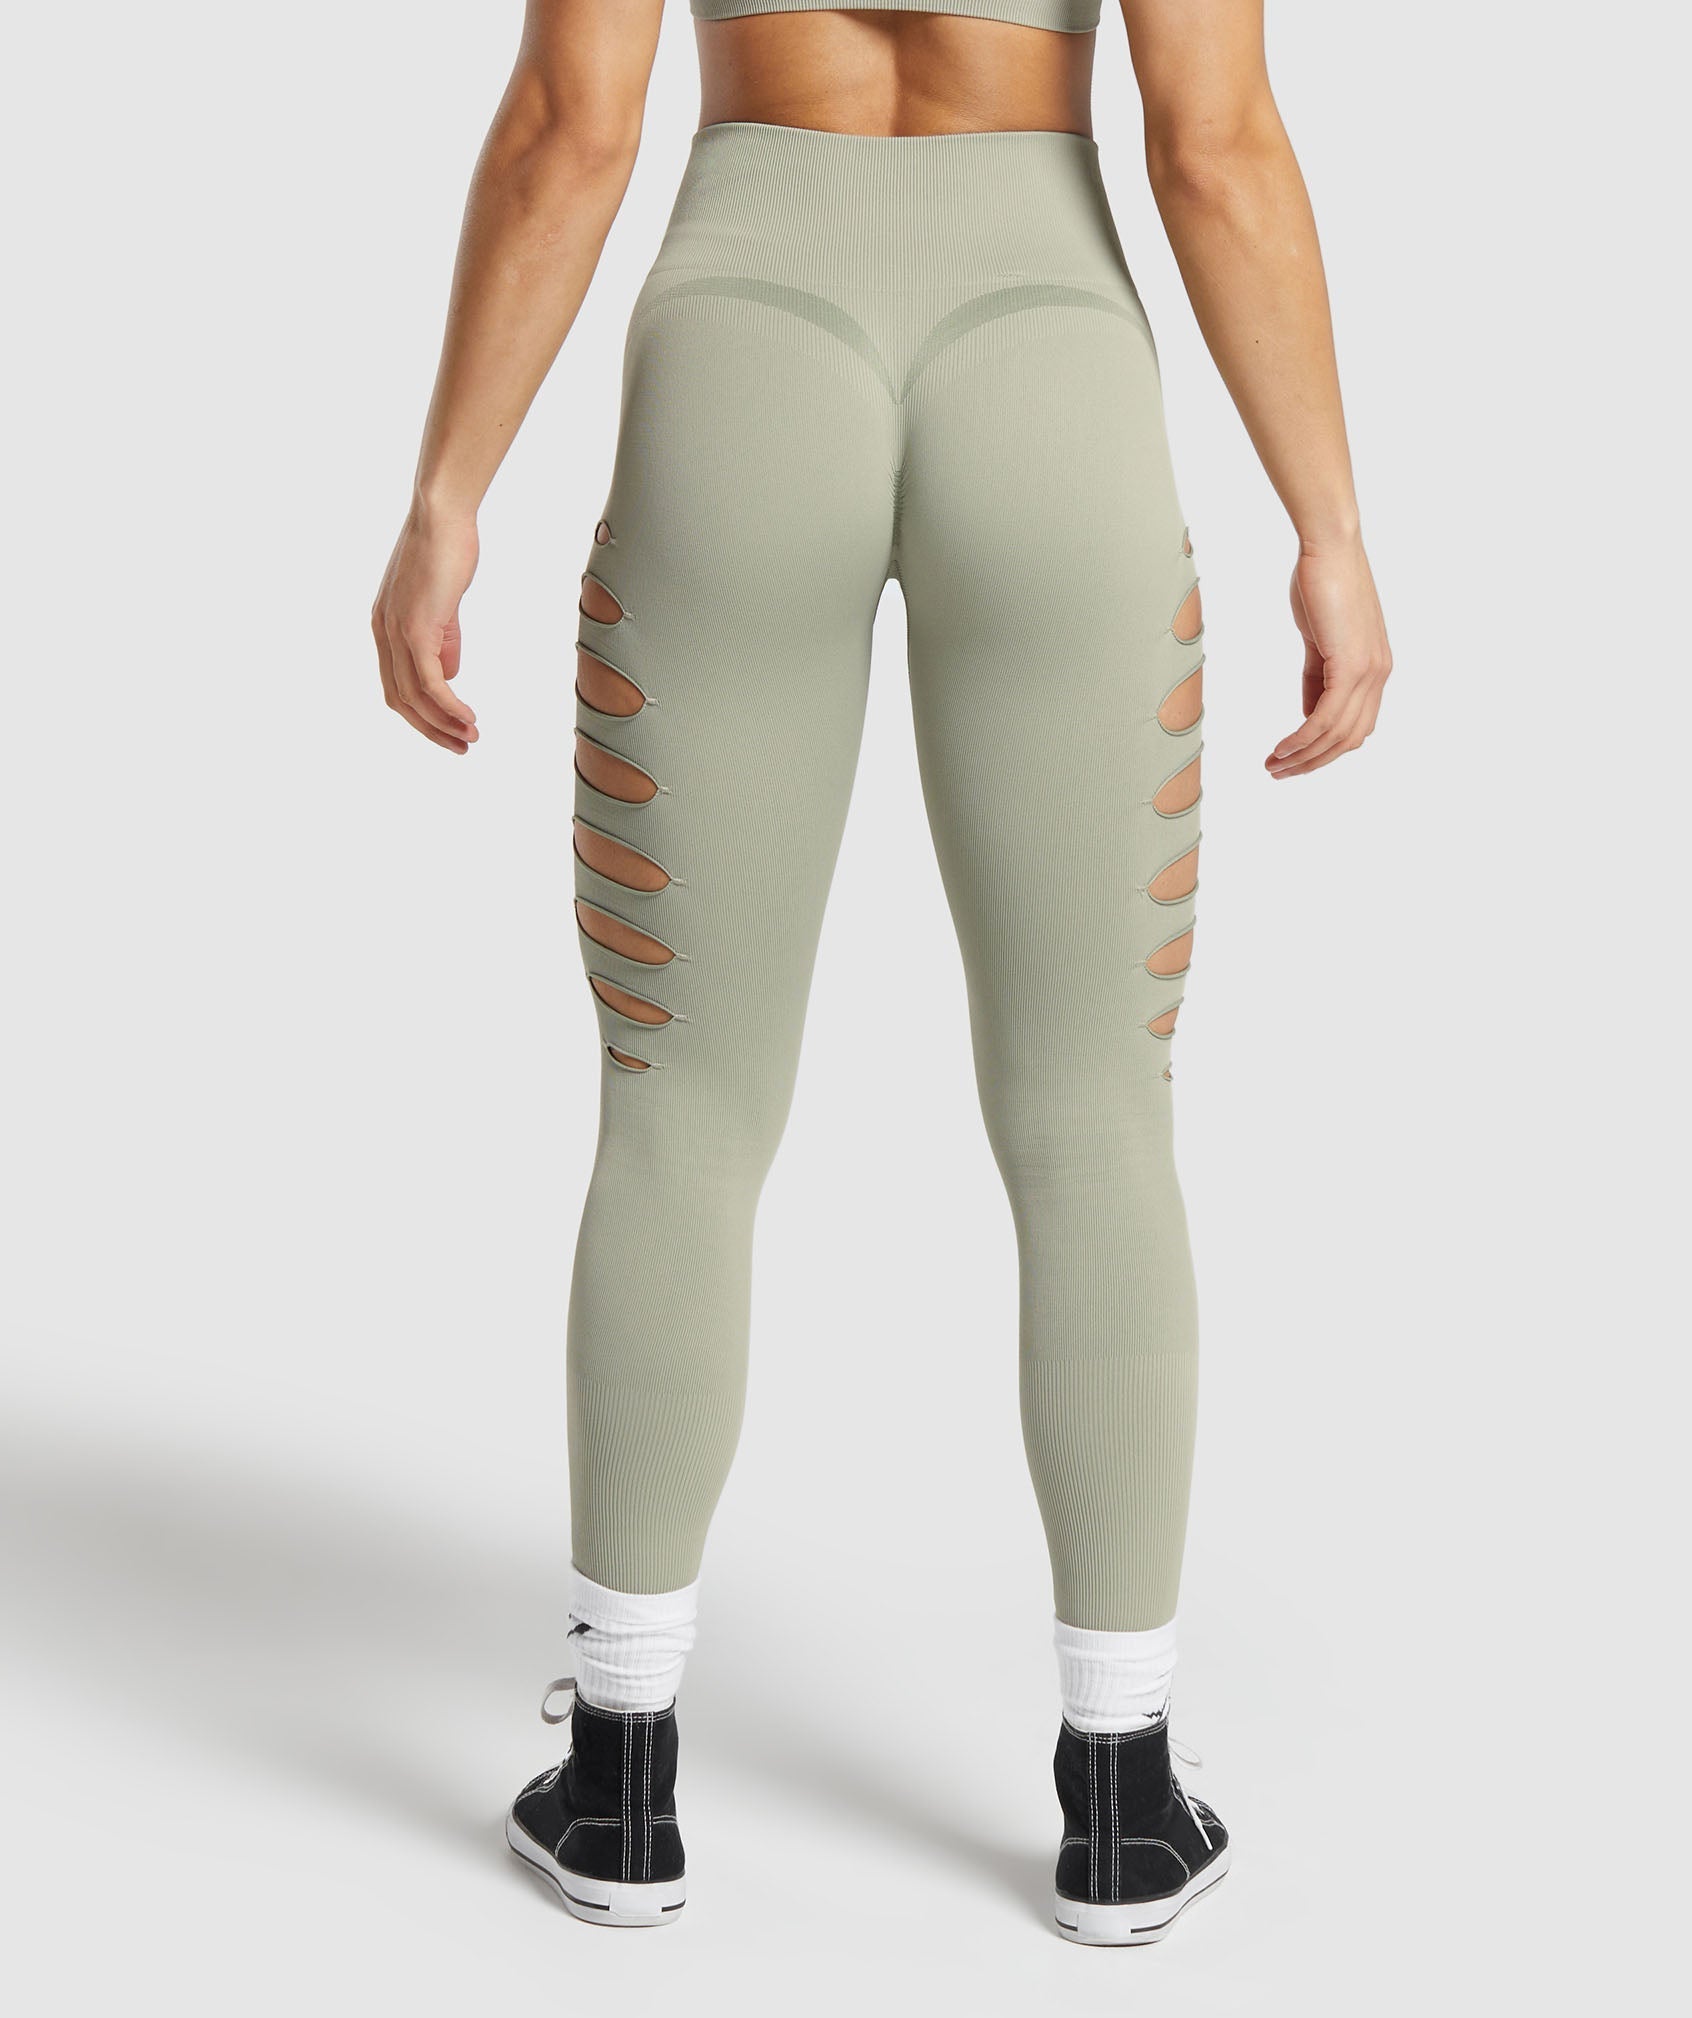 Gains Seamless Ripped Leggings in Chalk Green - view 3